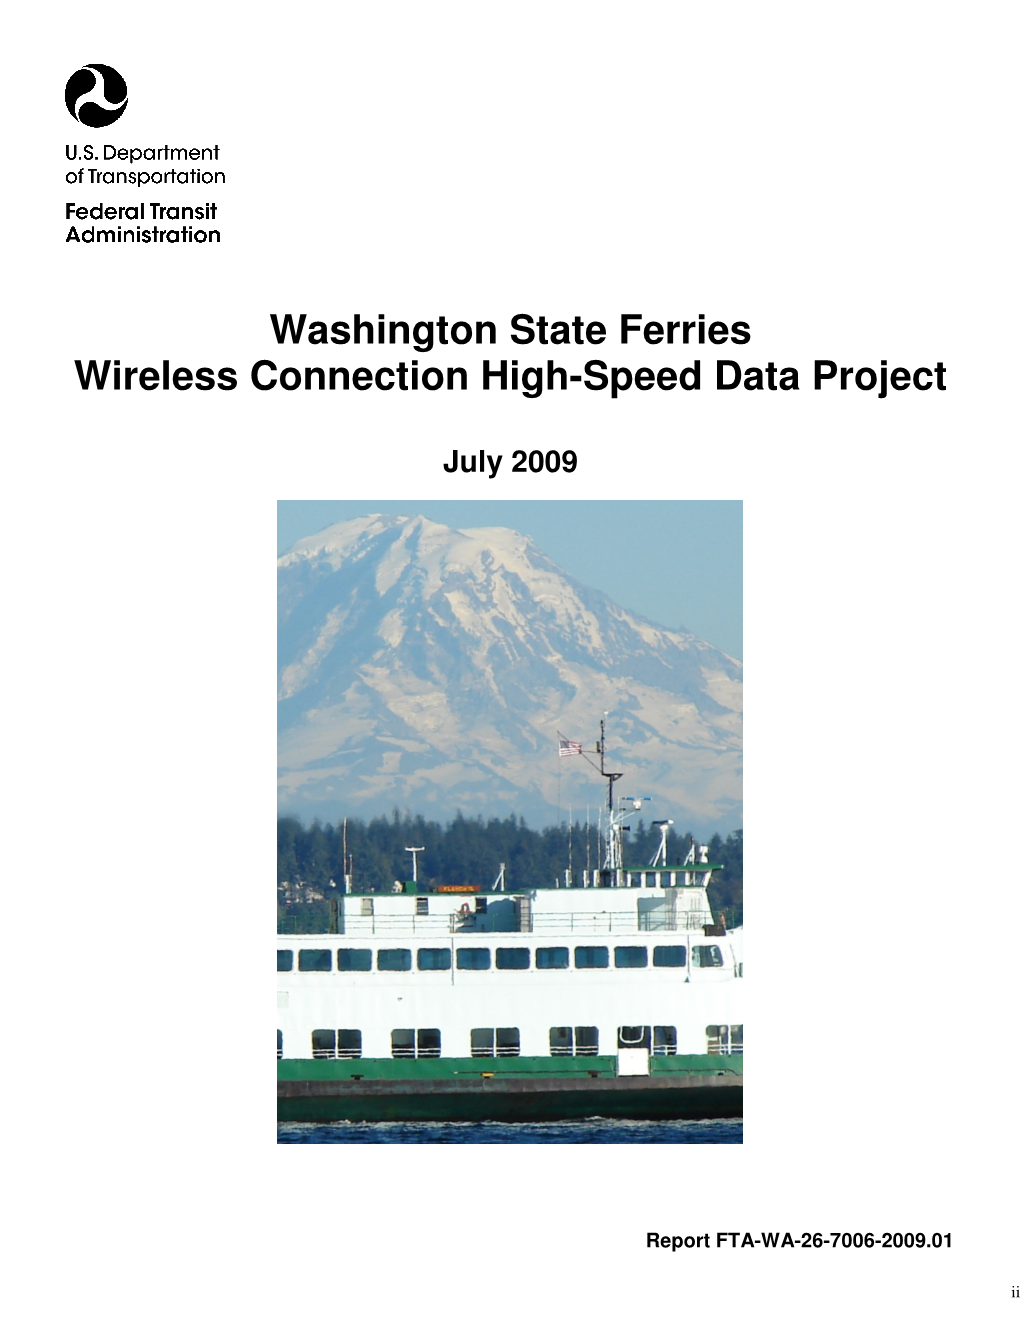 Washington State Ferries Wireless Connection High-Speed Data Project